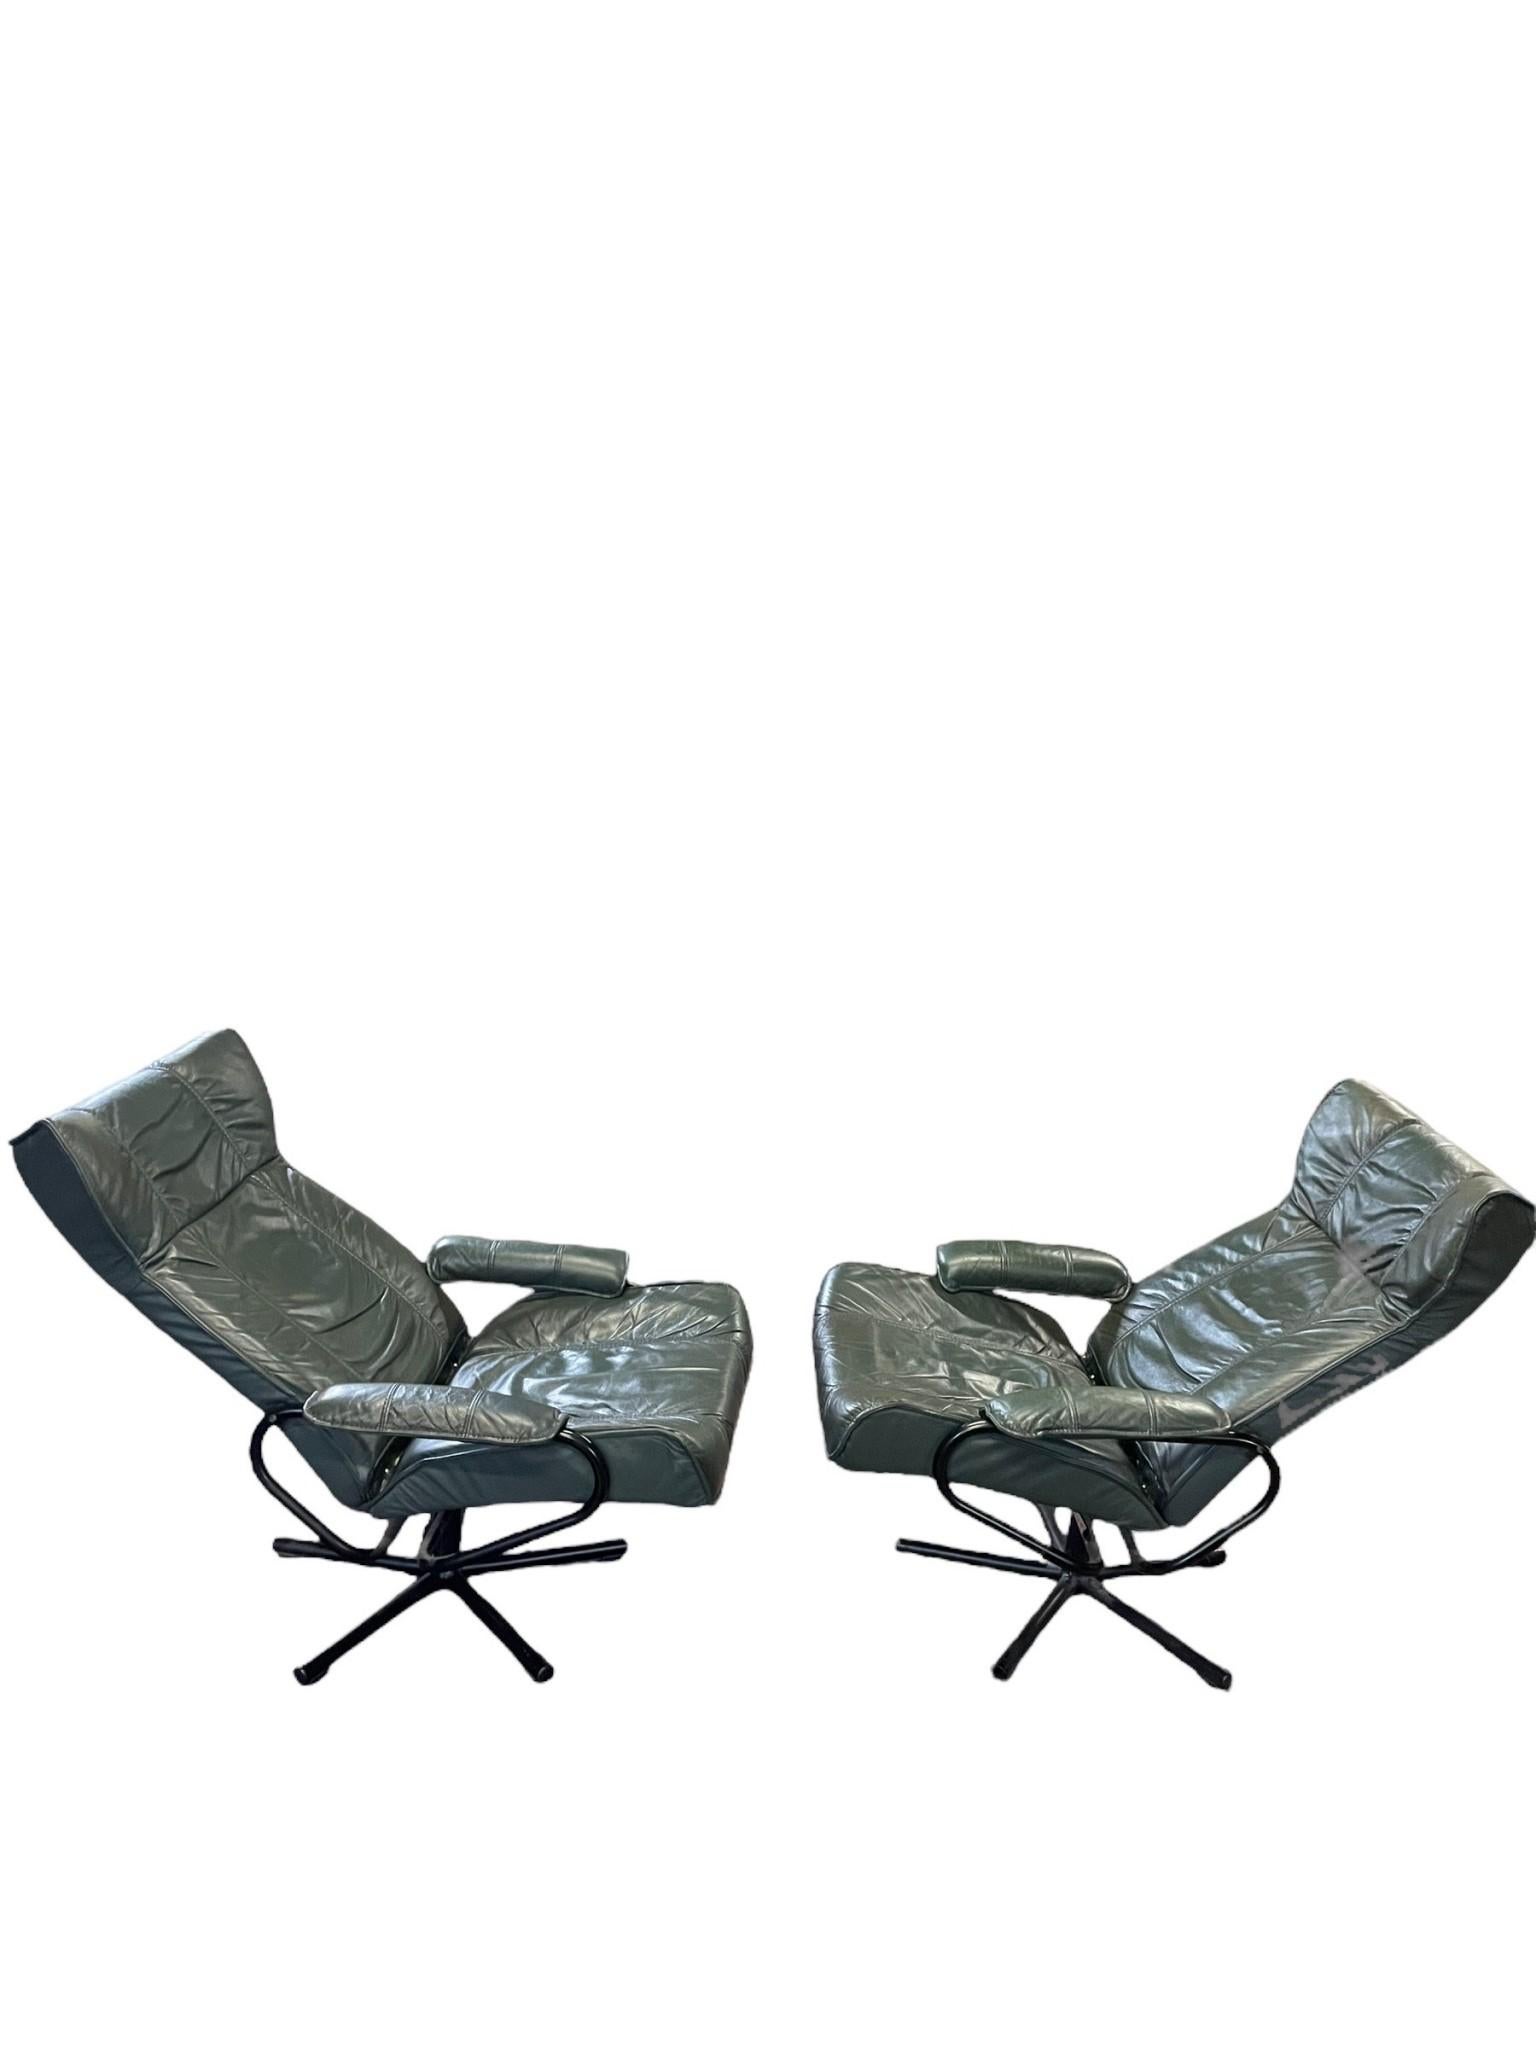 Pair Mid Century Modern Arm Chairs Danish Kebe Green Seats For Sale 2